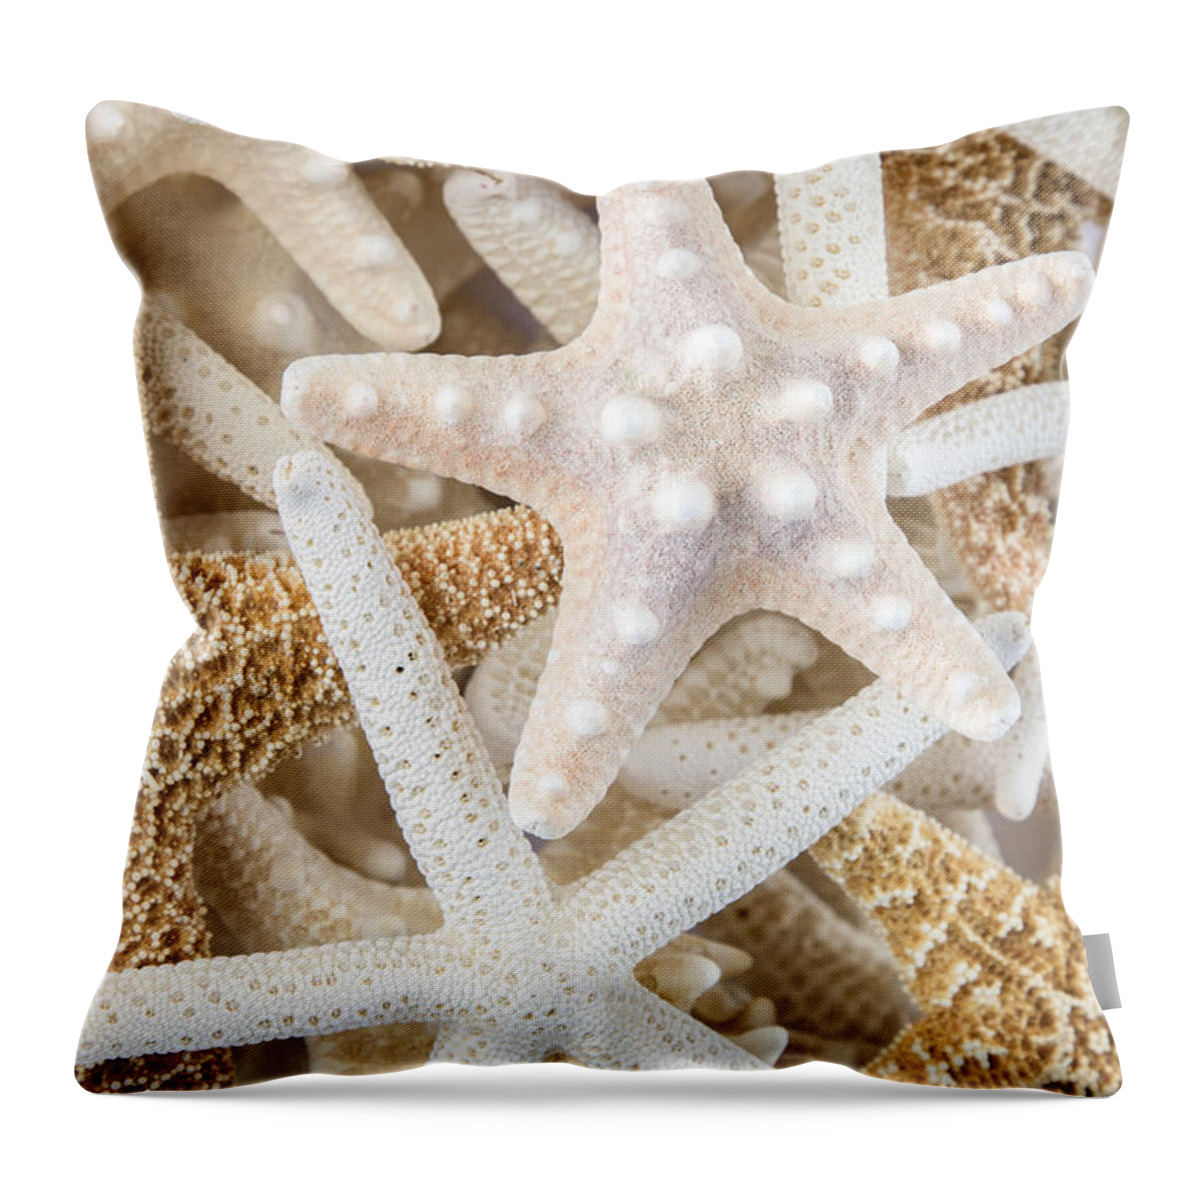 Above Throw Pillow featuring the photograph Starfish 2 by Leigh Anne Meeks